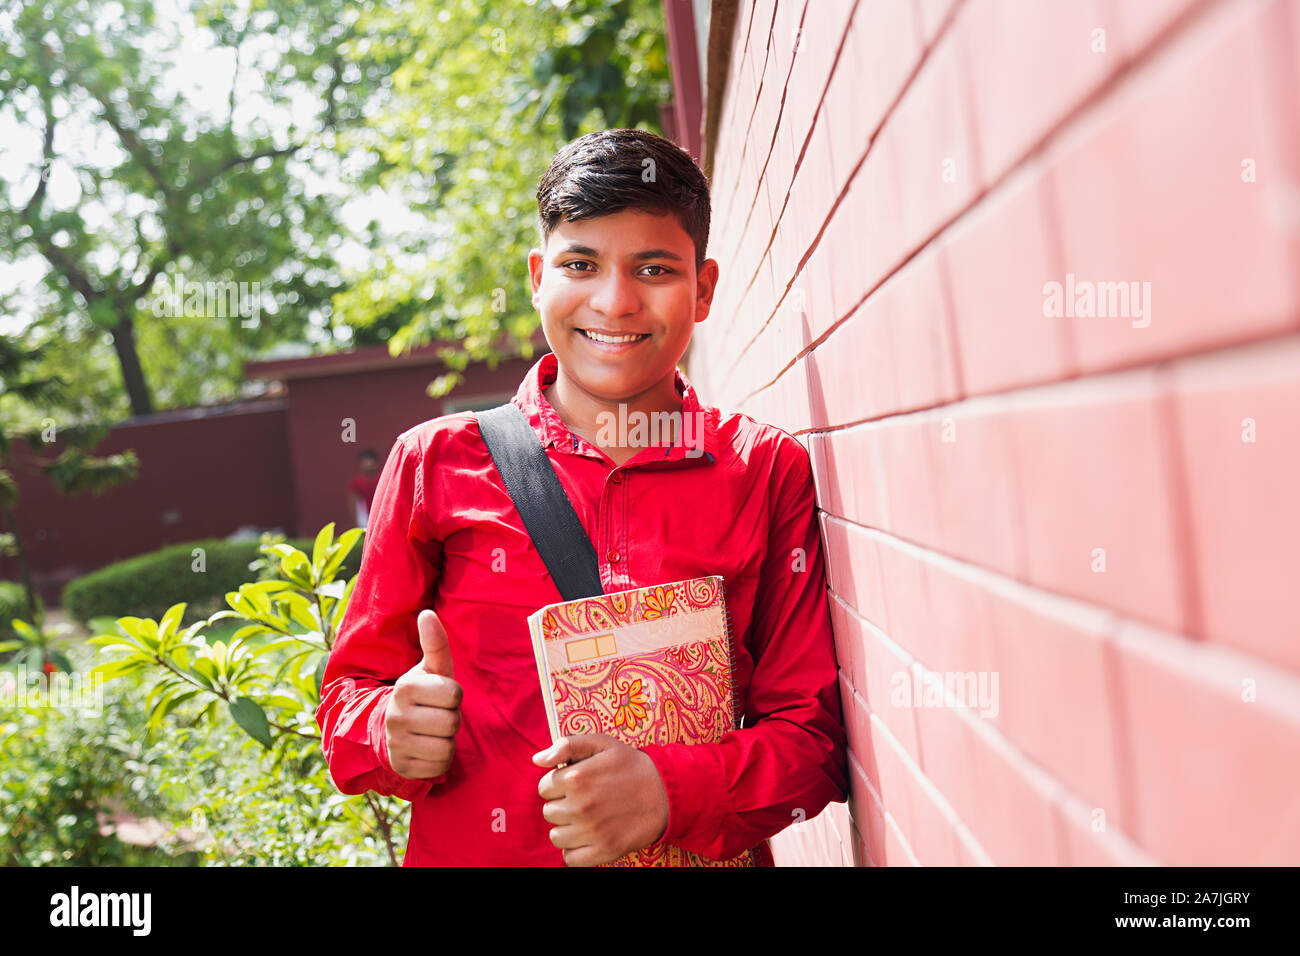 Young Teenage Boy College Student Holding Book While Showing Thumbs-up Outside College University Campus Stock Photo